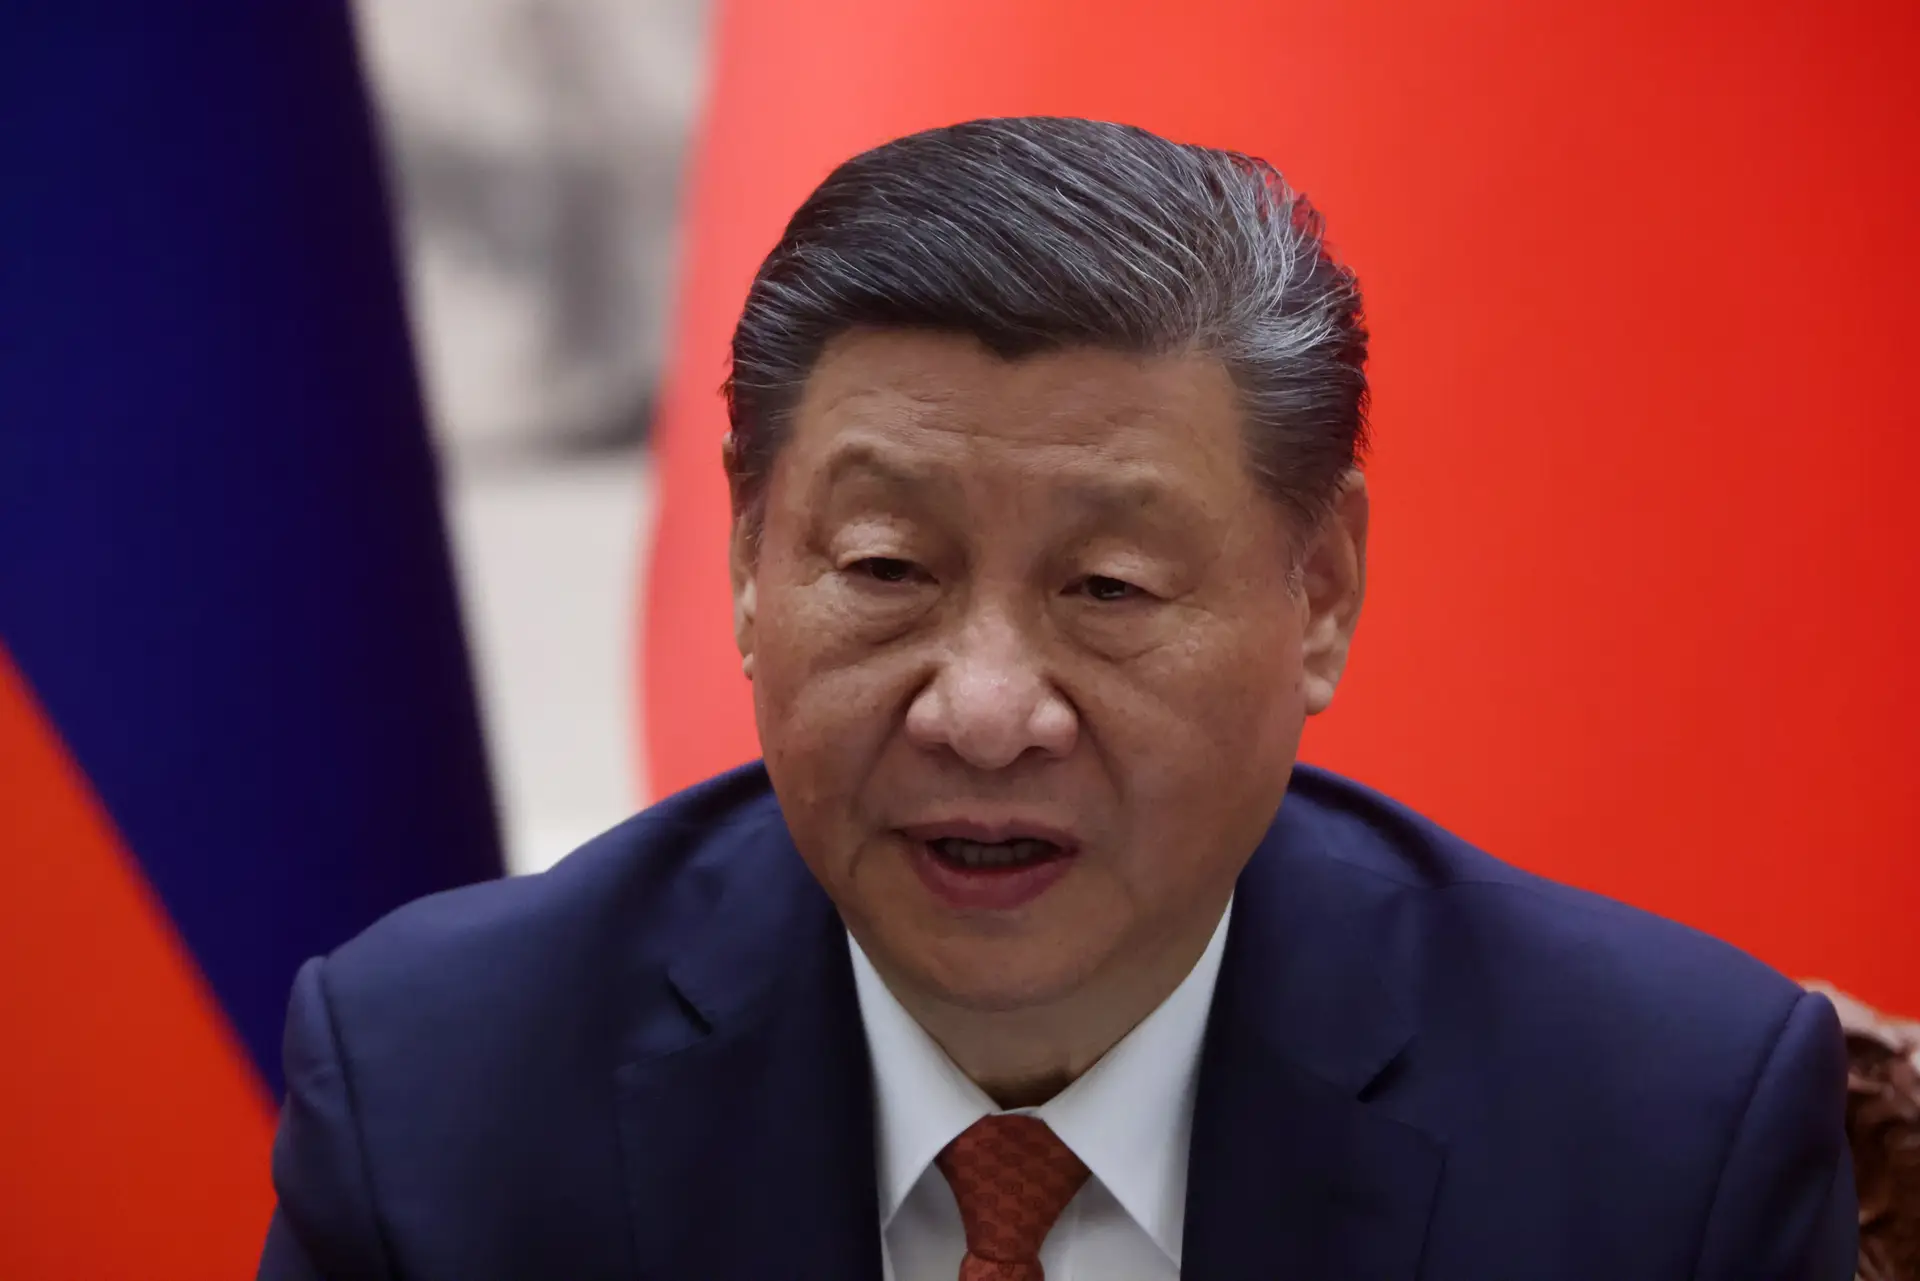 Xi Jinping: The more powerful China is, the greater the hope for world peace